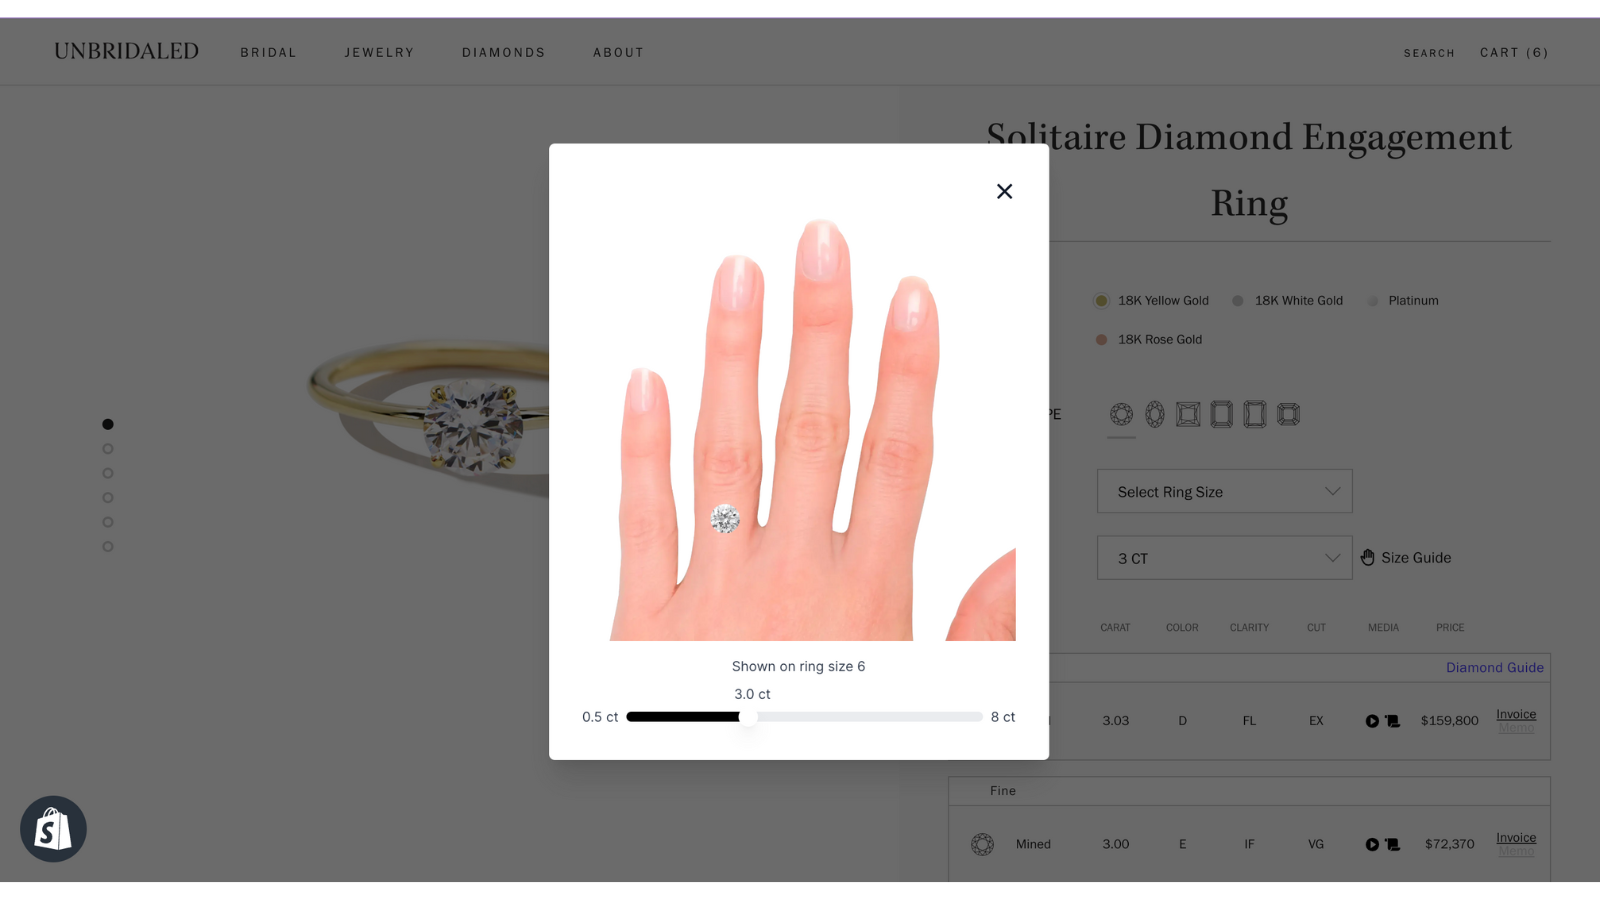 NEW! Diamond Size Guide helps customers decide on carat size.